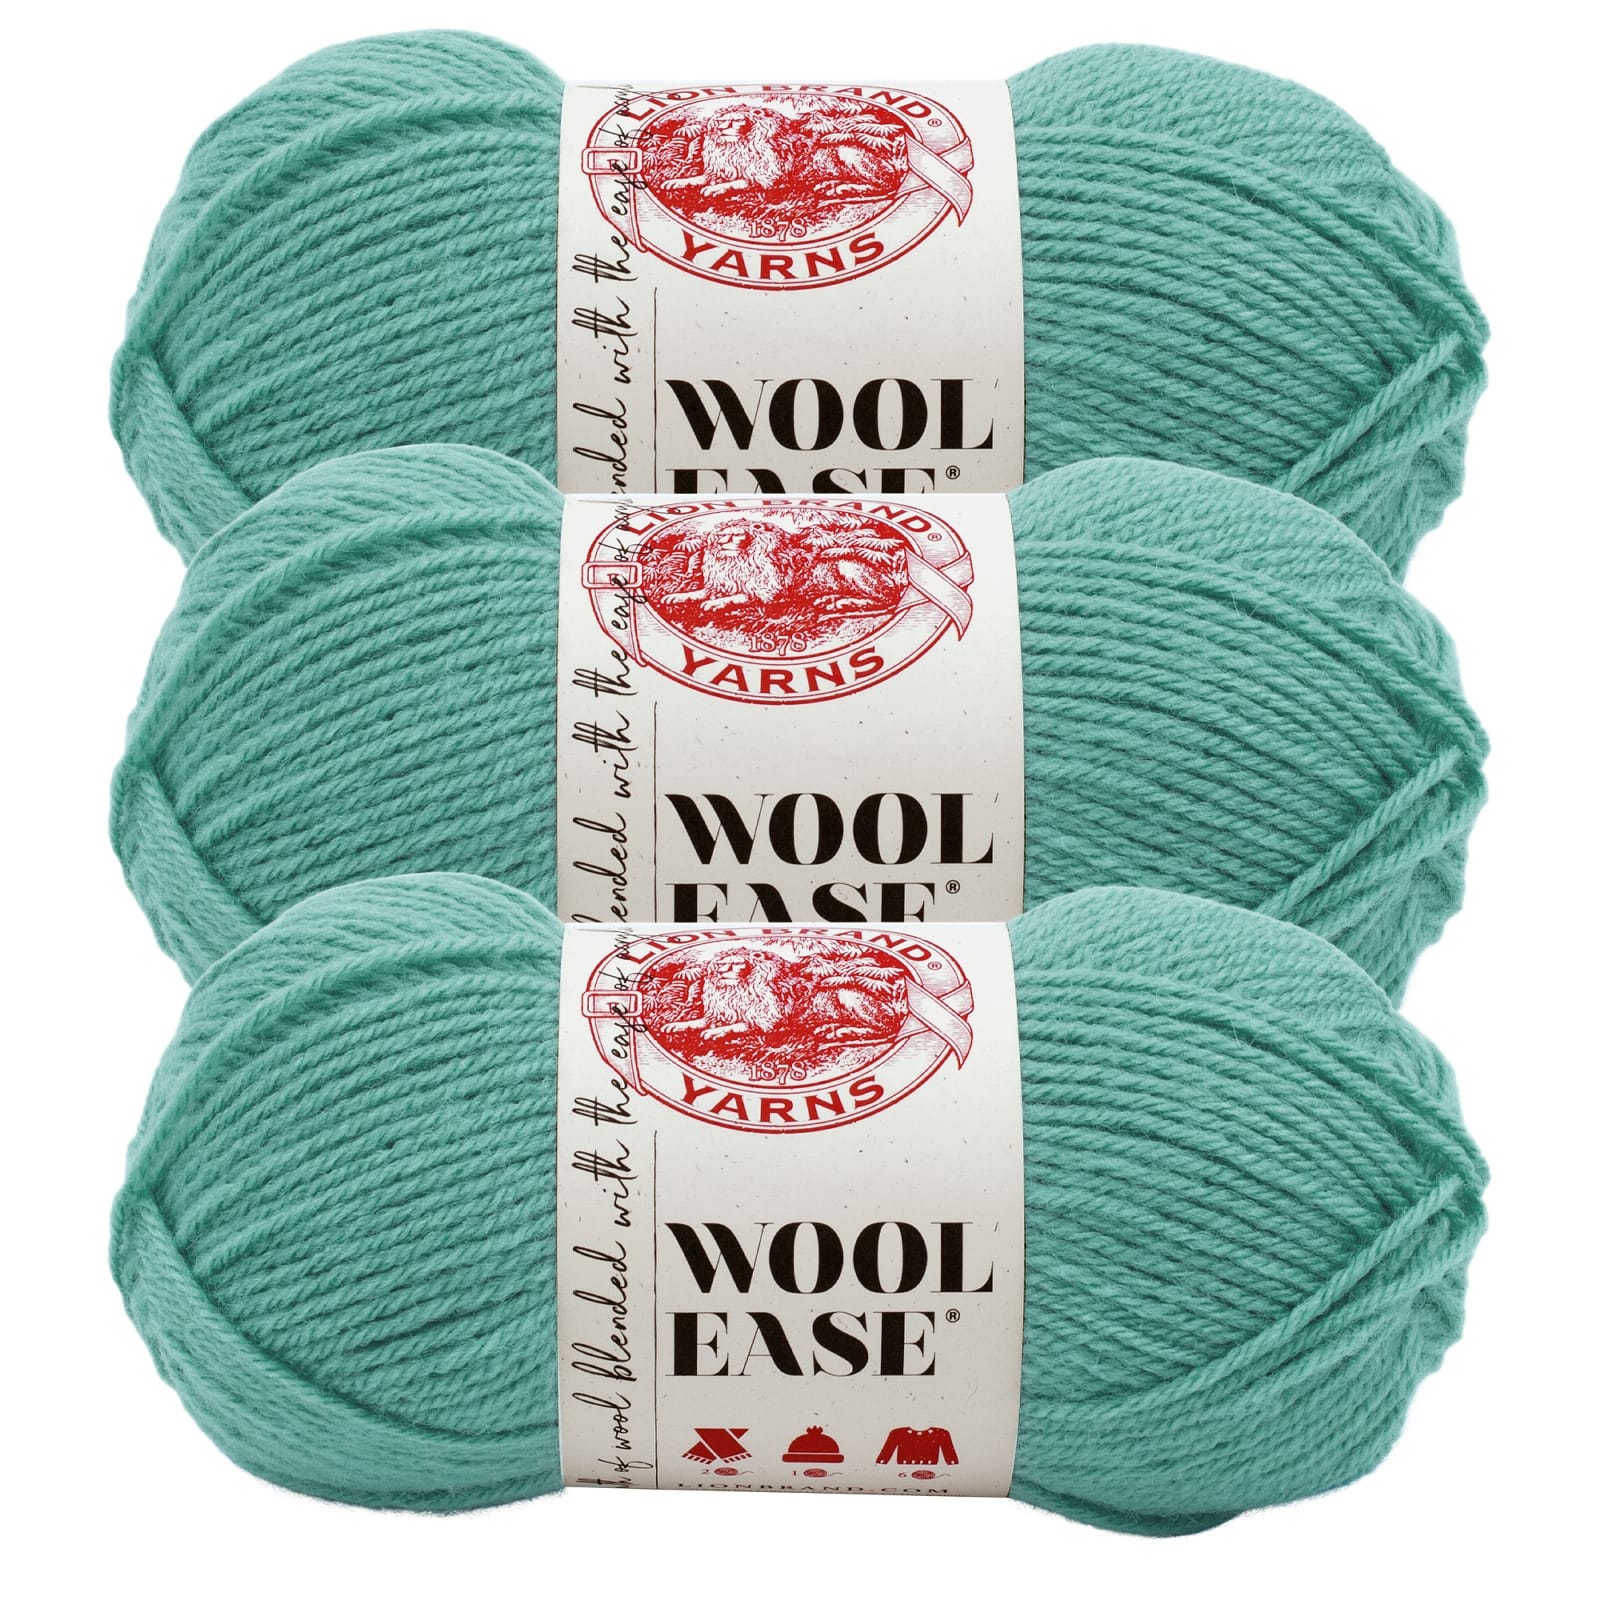 Lot of 4 Lion Brand Wool Ease Yarn Skeins Blue Green Gray 3 Oz Each Worsted  NEW